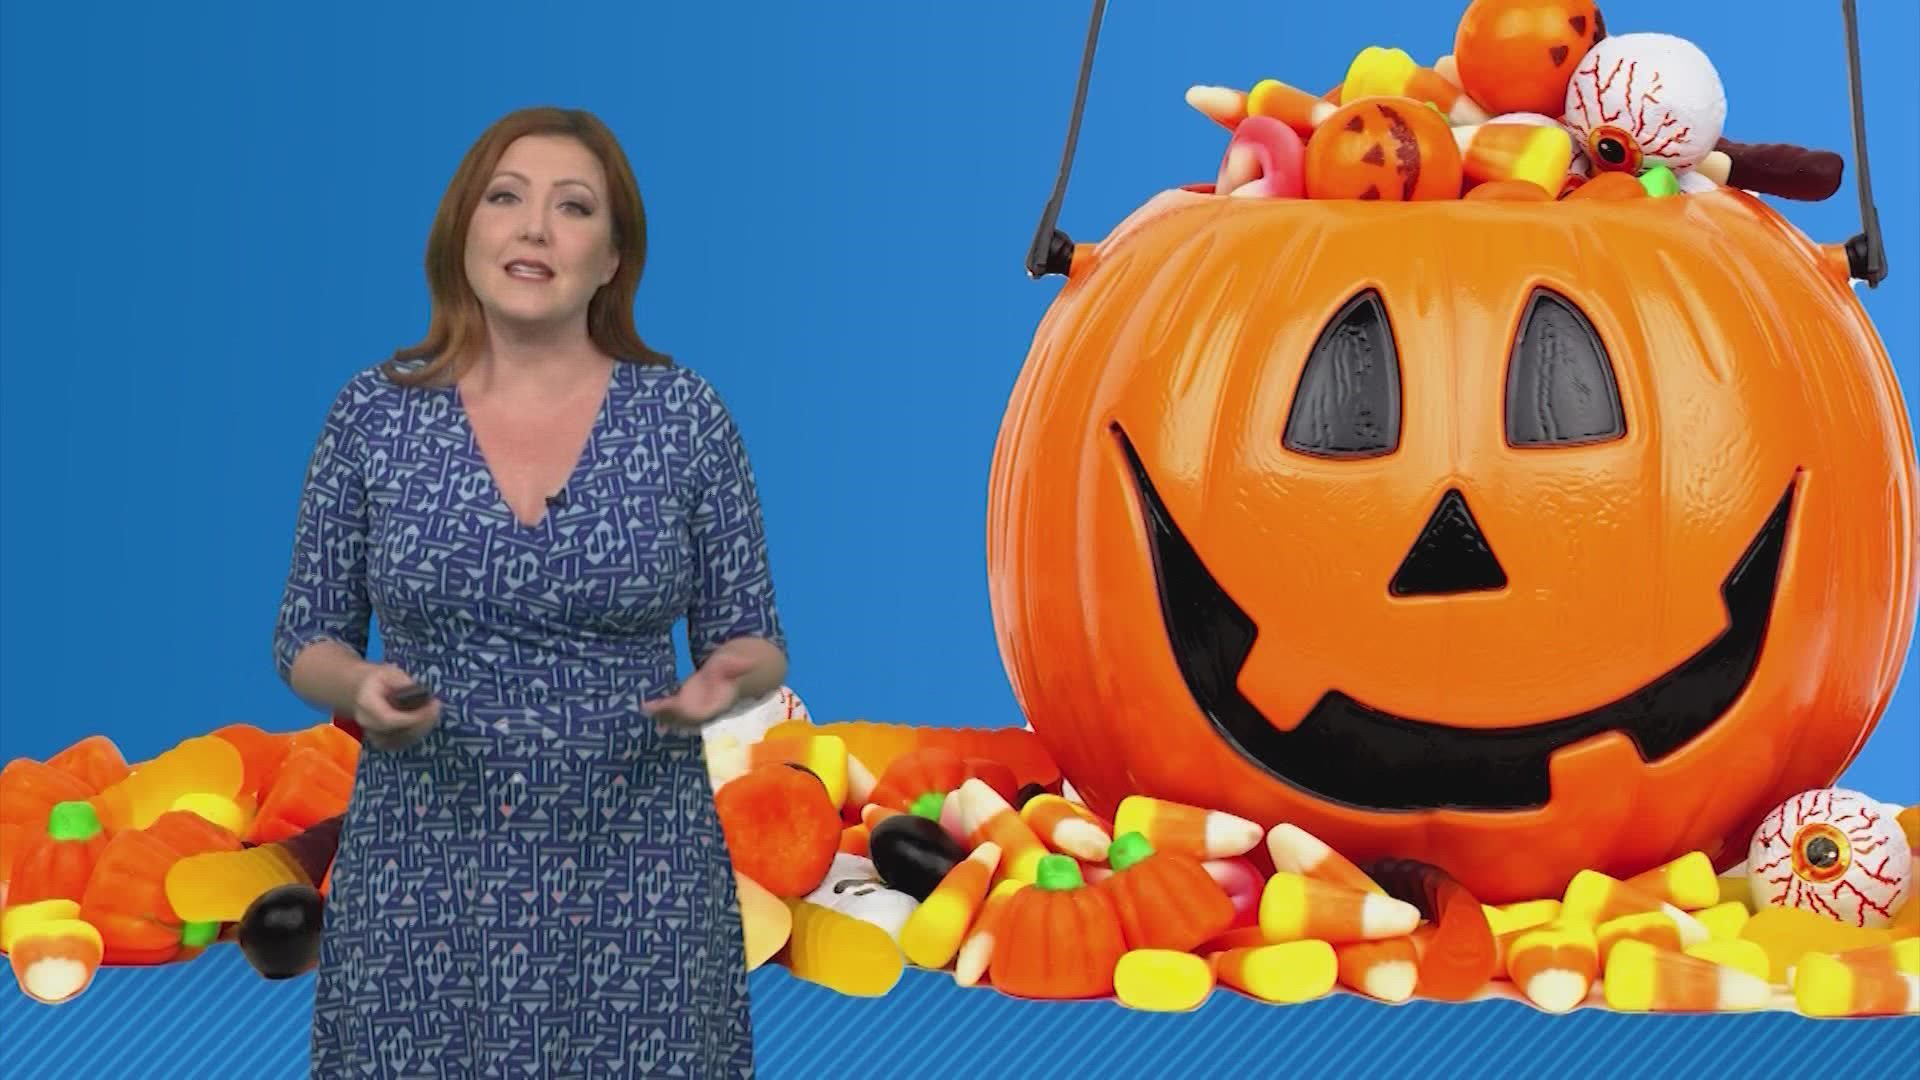 USA Today says about 35 million pounds of candy corn are produced every year.